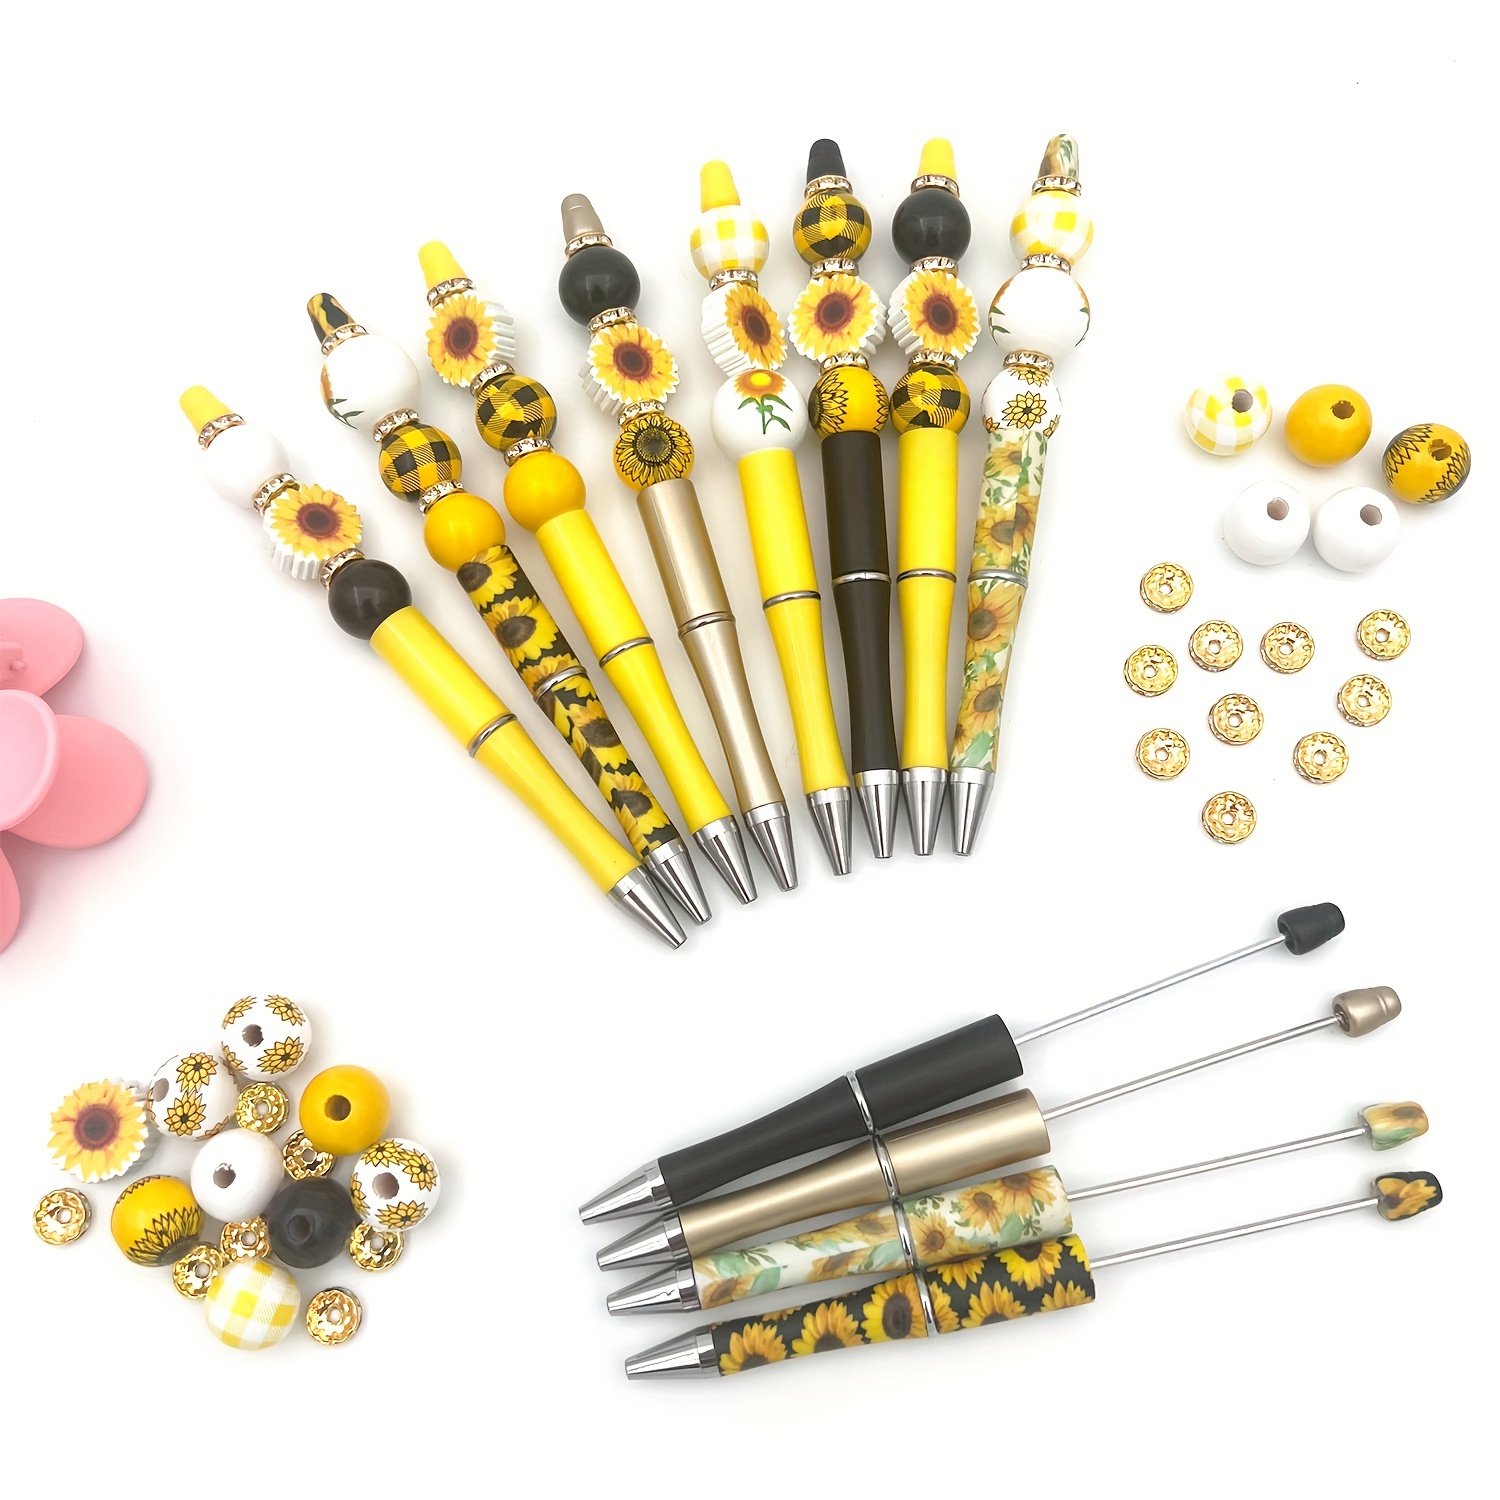 

12pcs Plastic Beaded Pen Kit, Sunflower Shape And Round Beads, Golden Spacer Beads, Black Ink Ballpoint Pens, Diy Beading Craft Pens, Cute Gift Idea For Ladies, School & Office Supplies